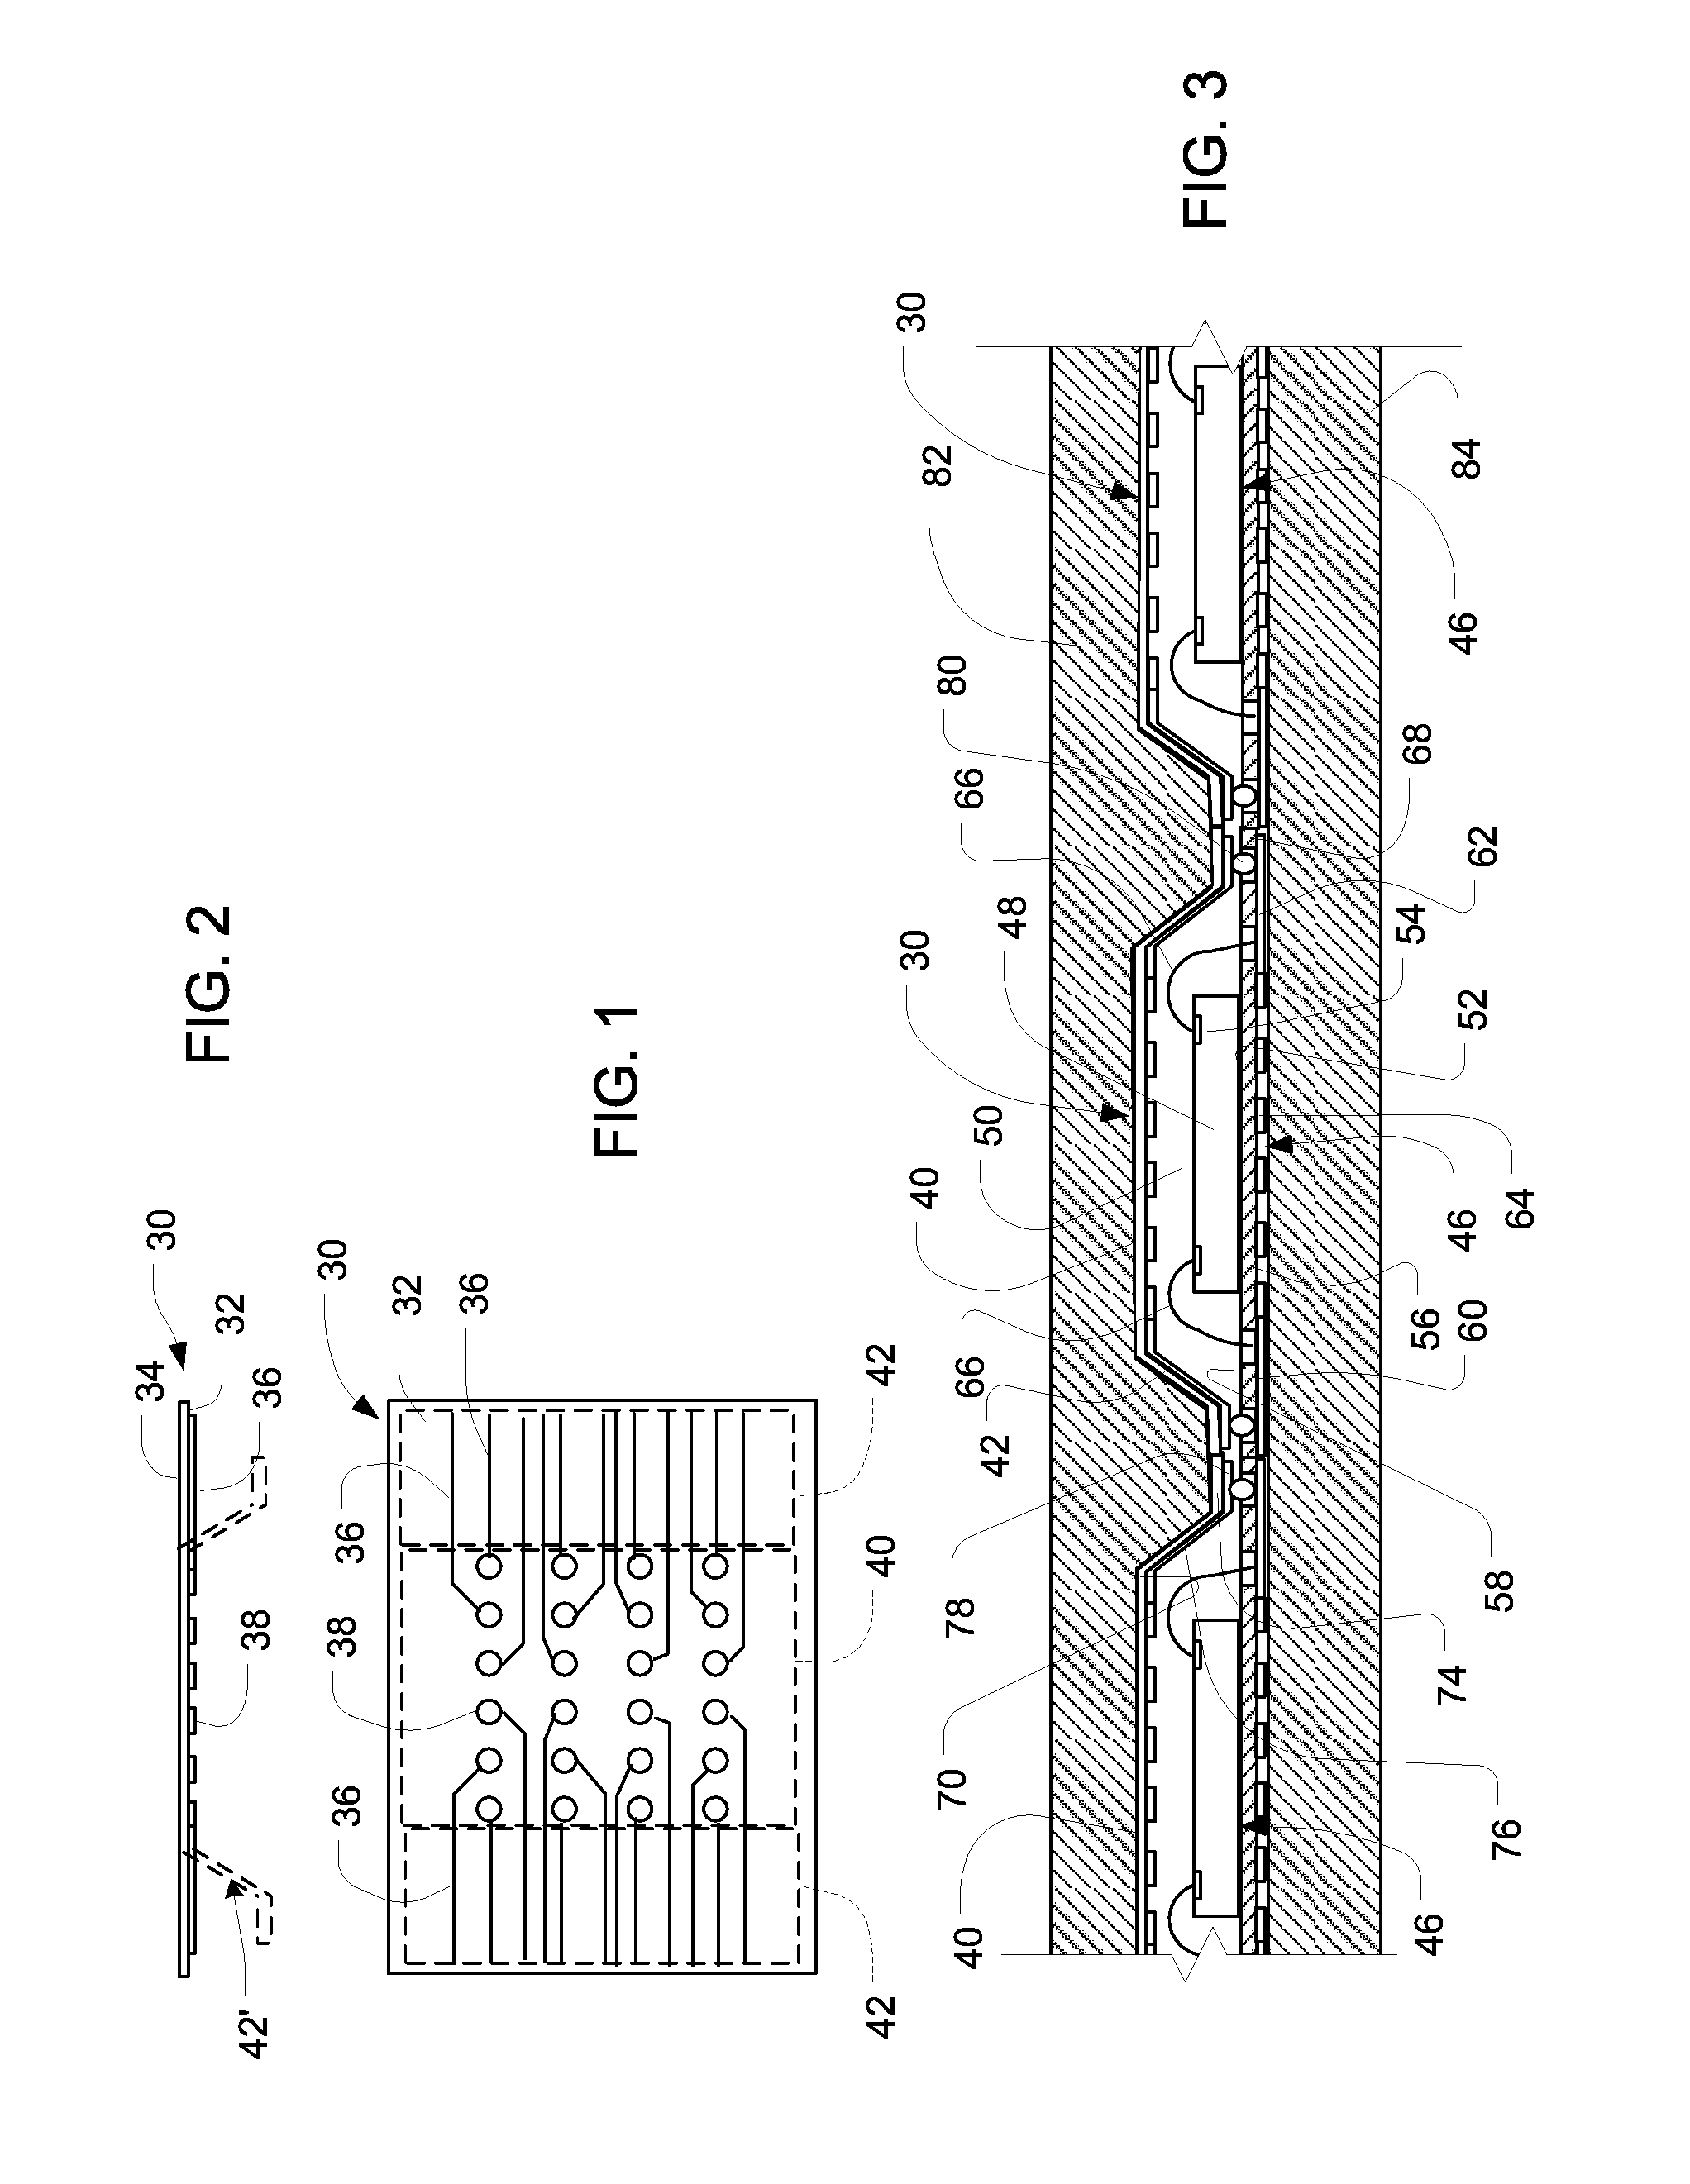 Microelectronic package with terminals on dielectric mass